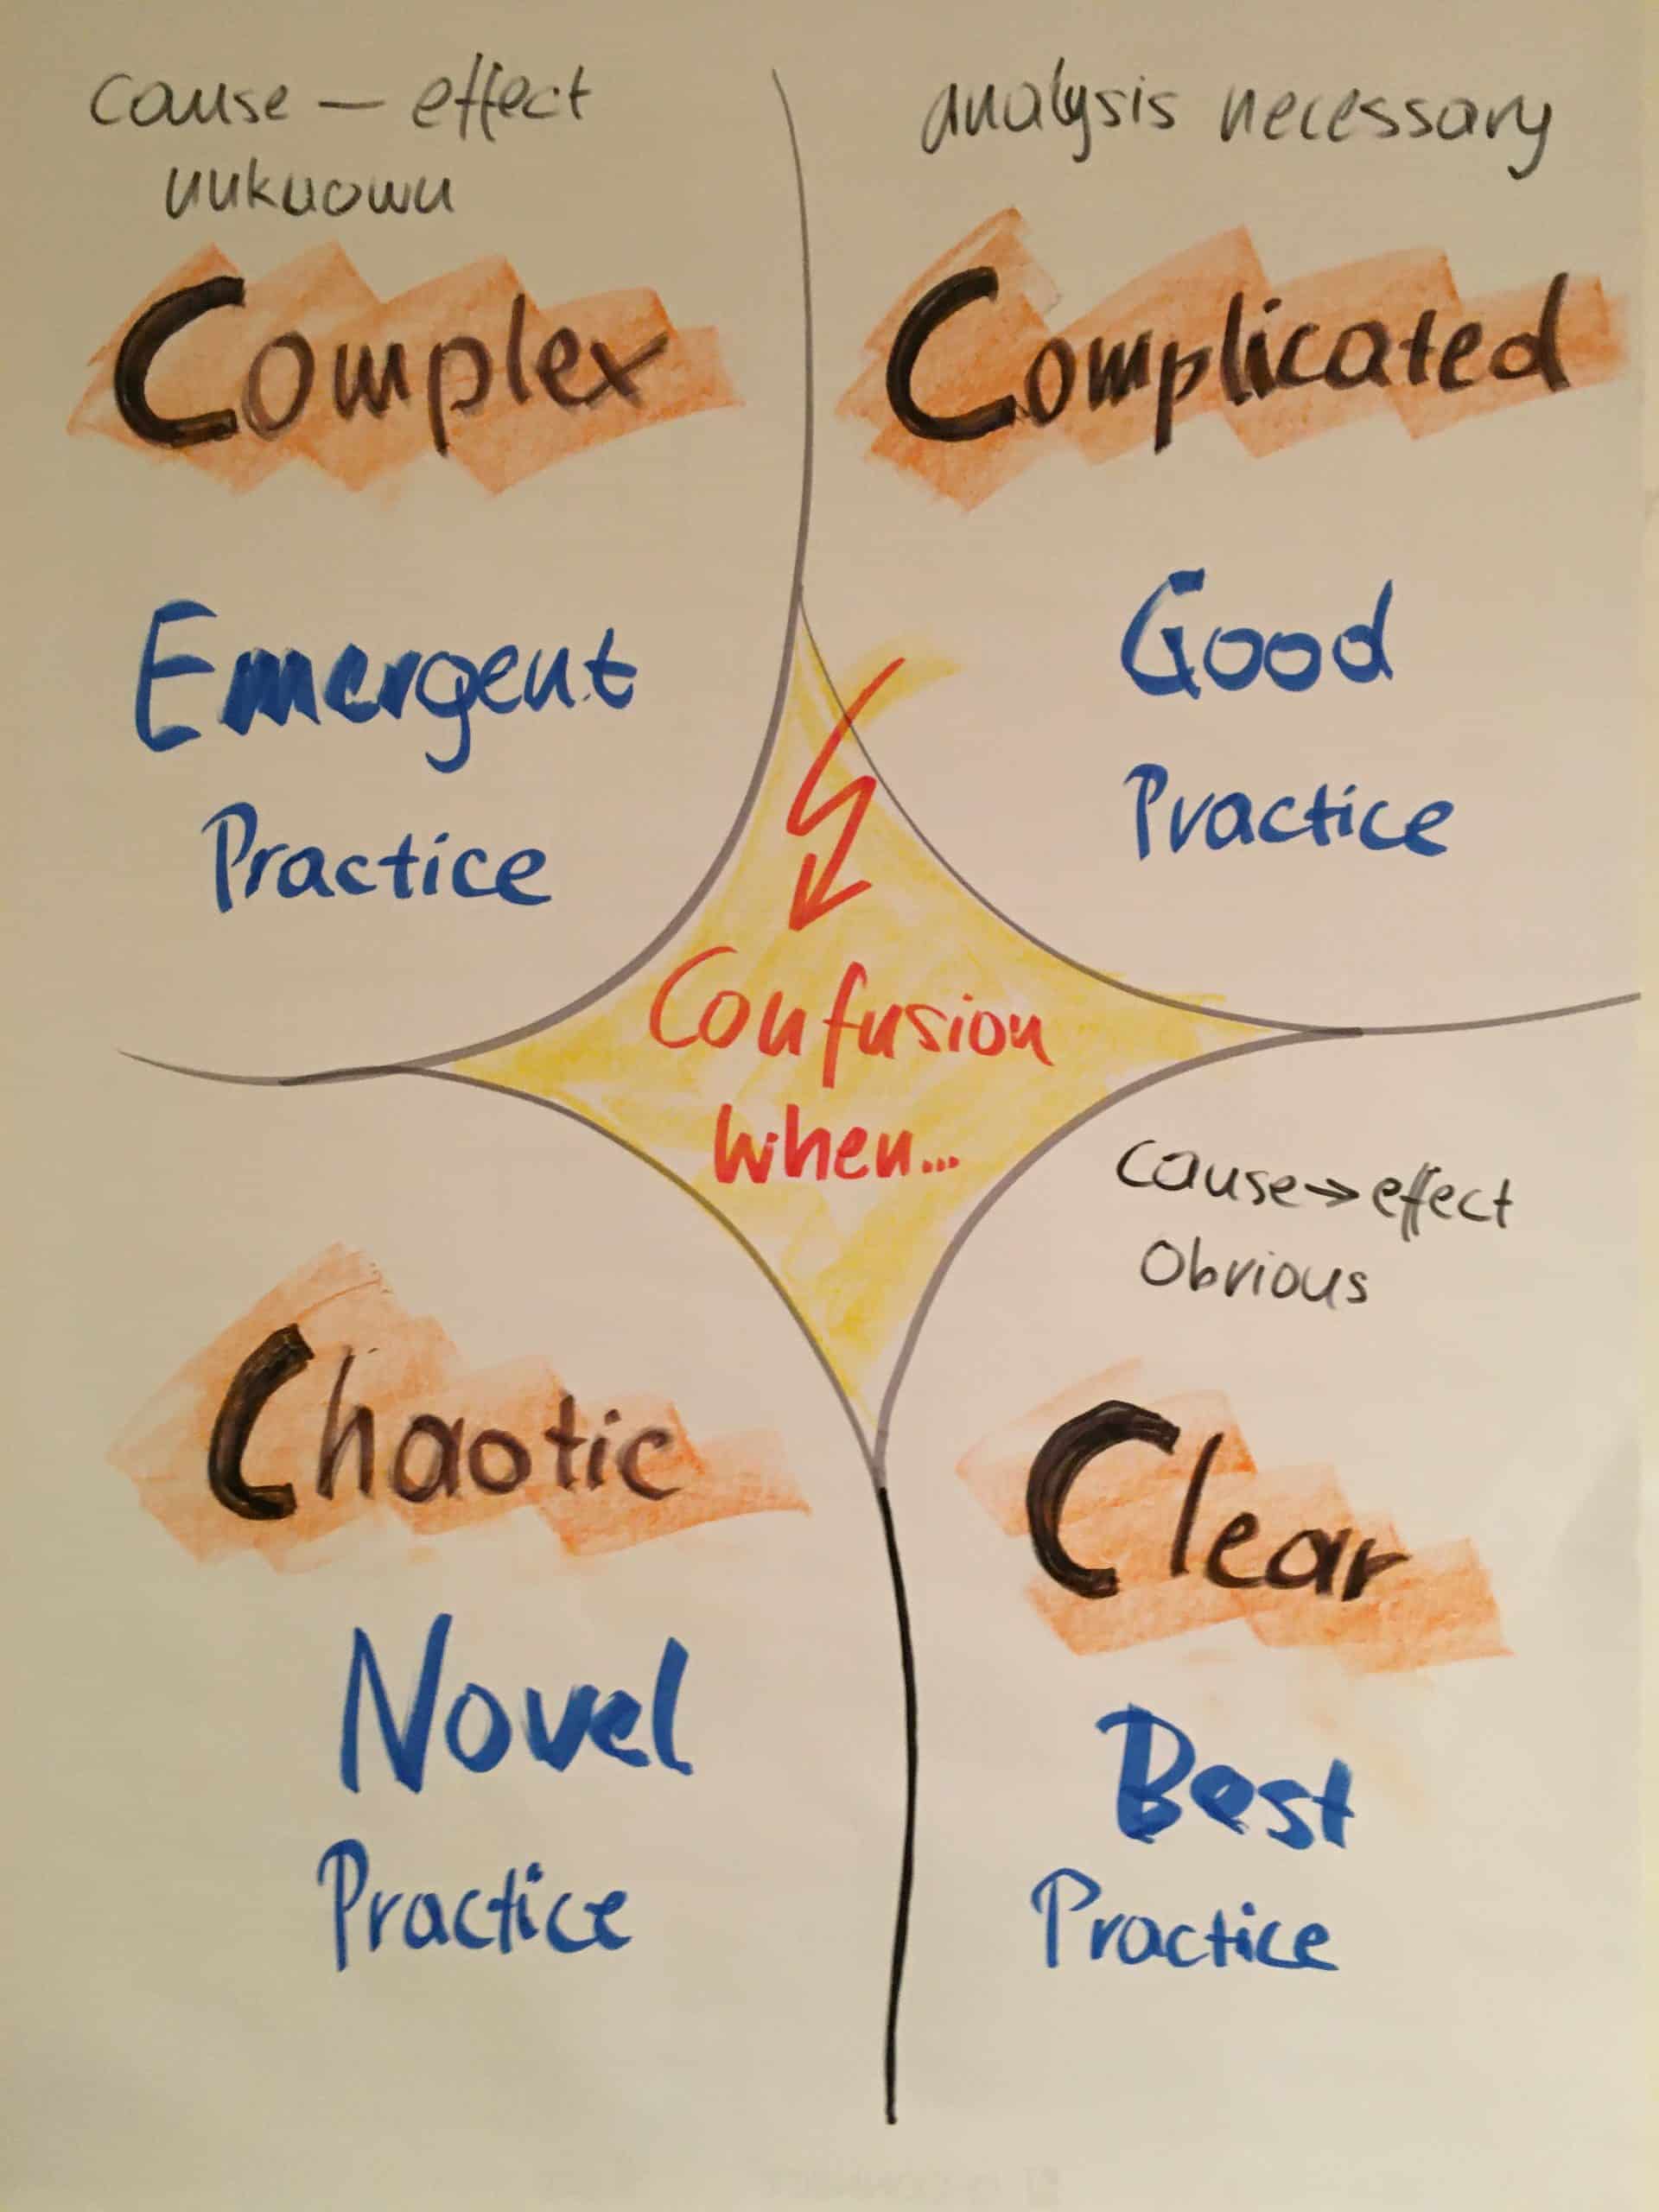 The Cynefin Model - clear, complicated, complex, chaotic